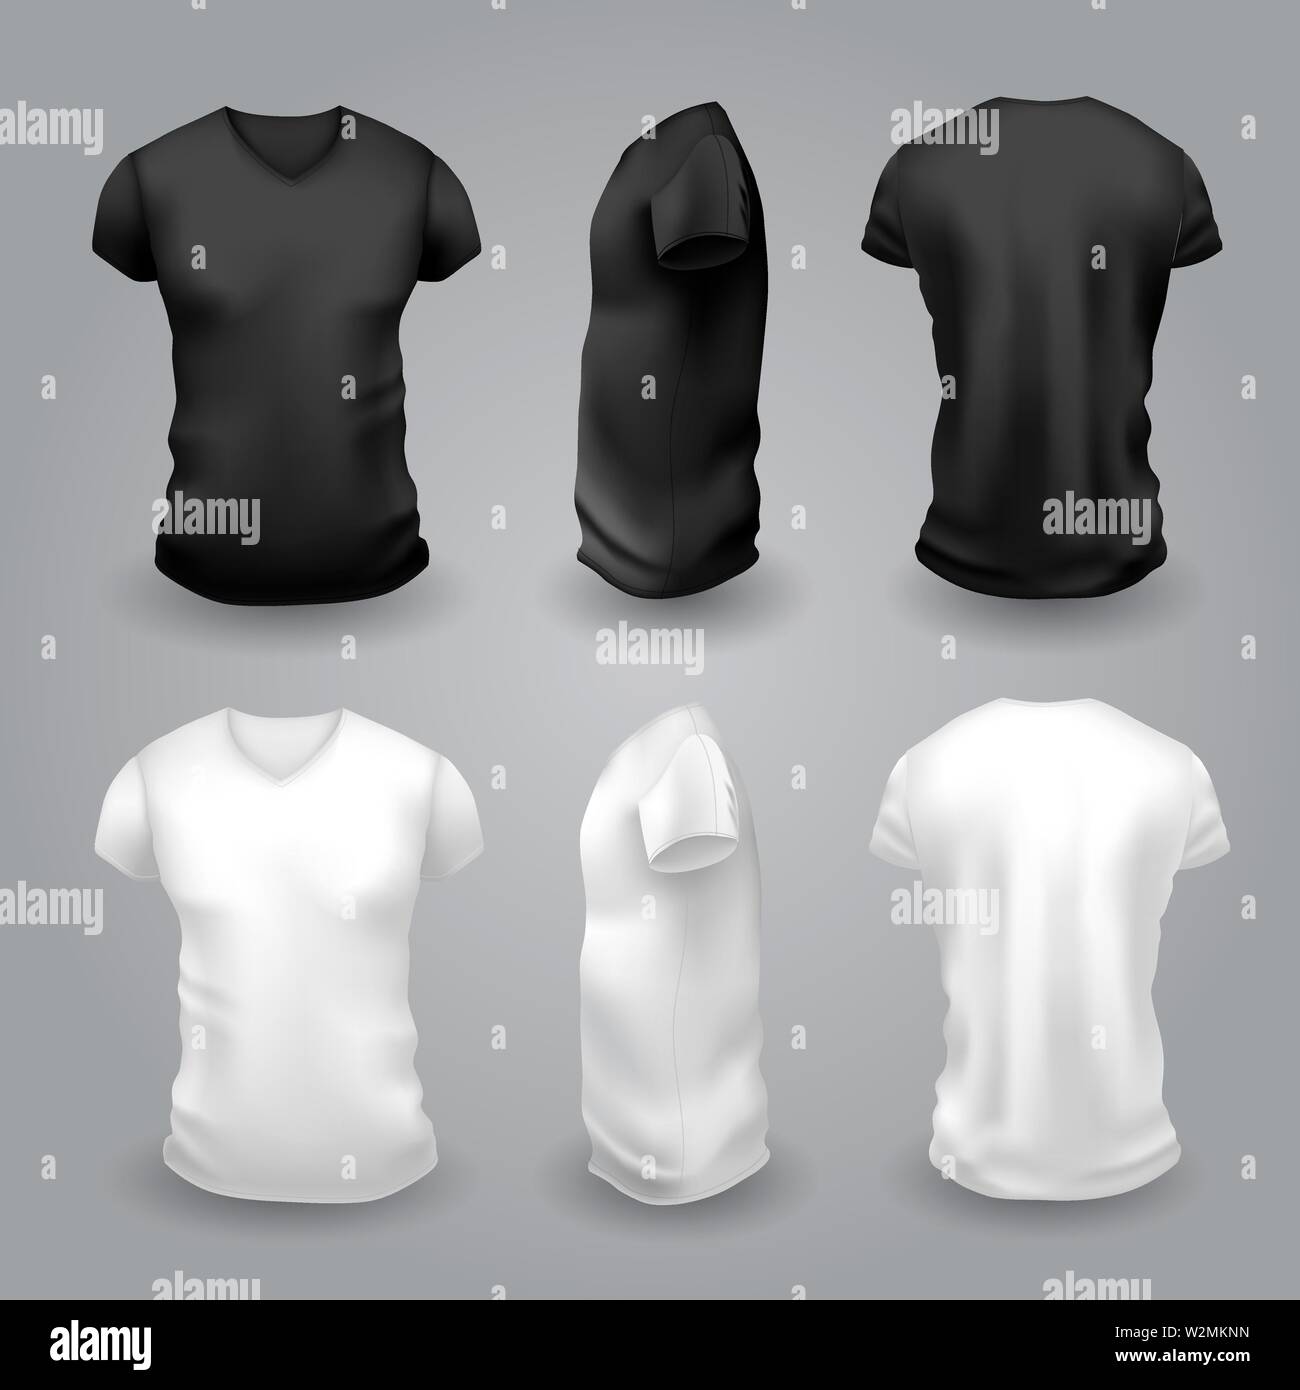 T shirt template front side and back black white Vector Image